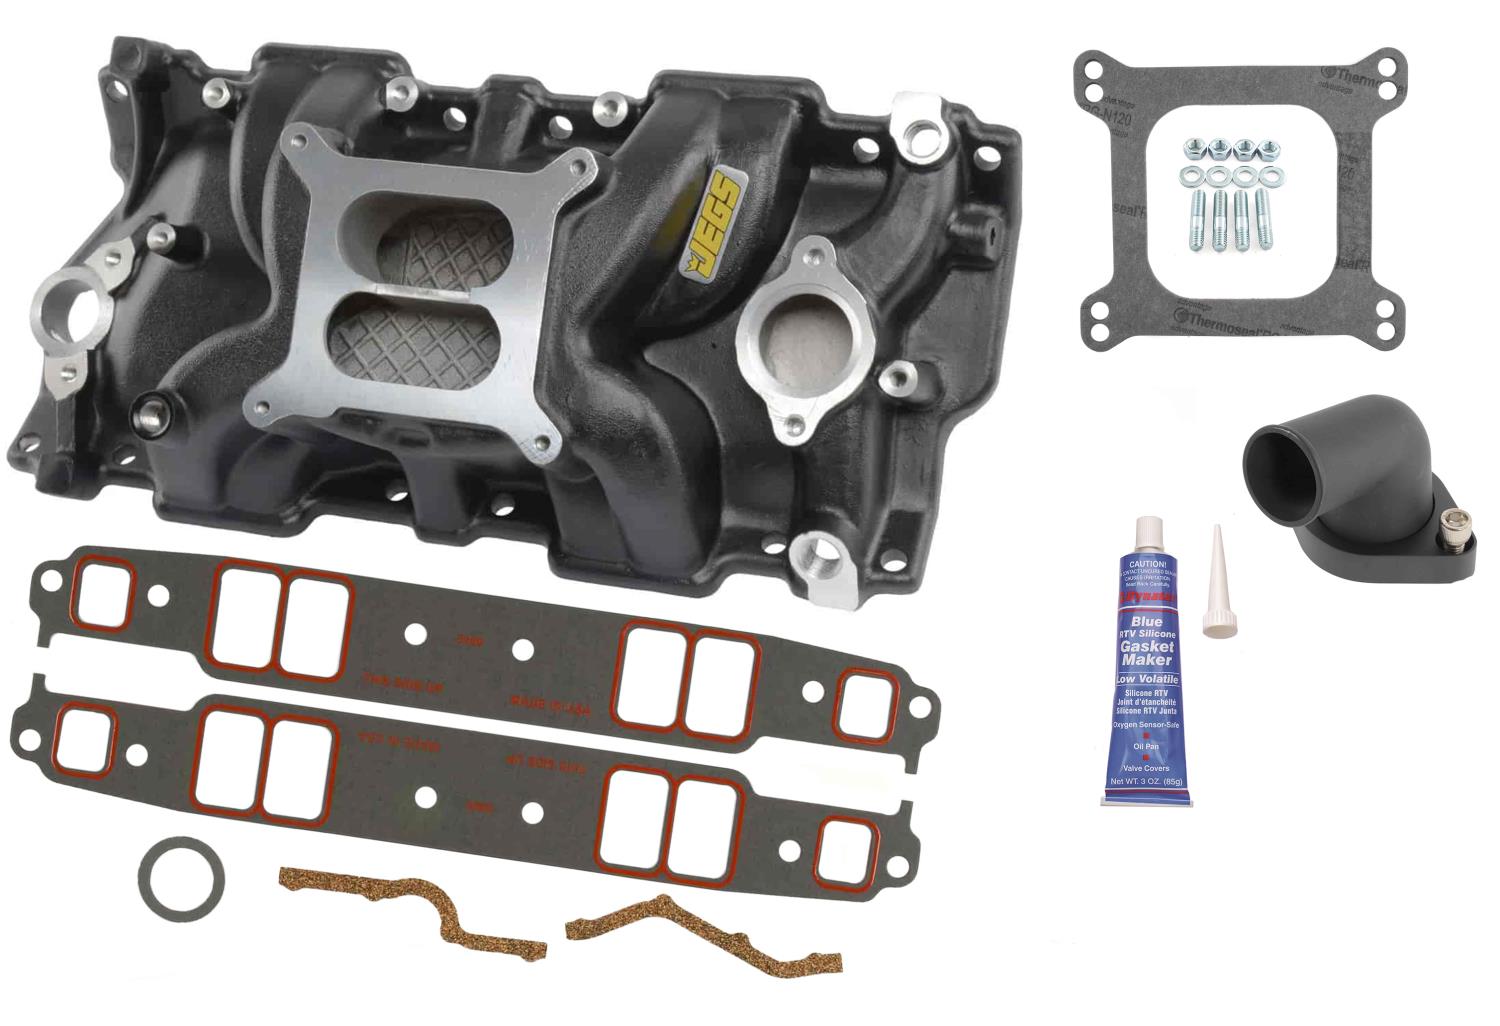 Intake Manifold Kit for 1955-1986 Small Block Chevy